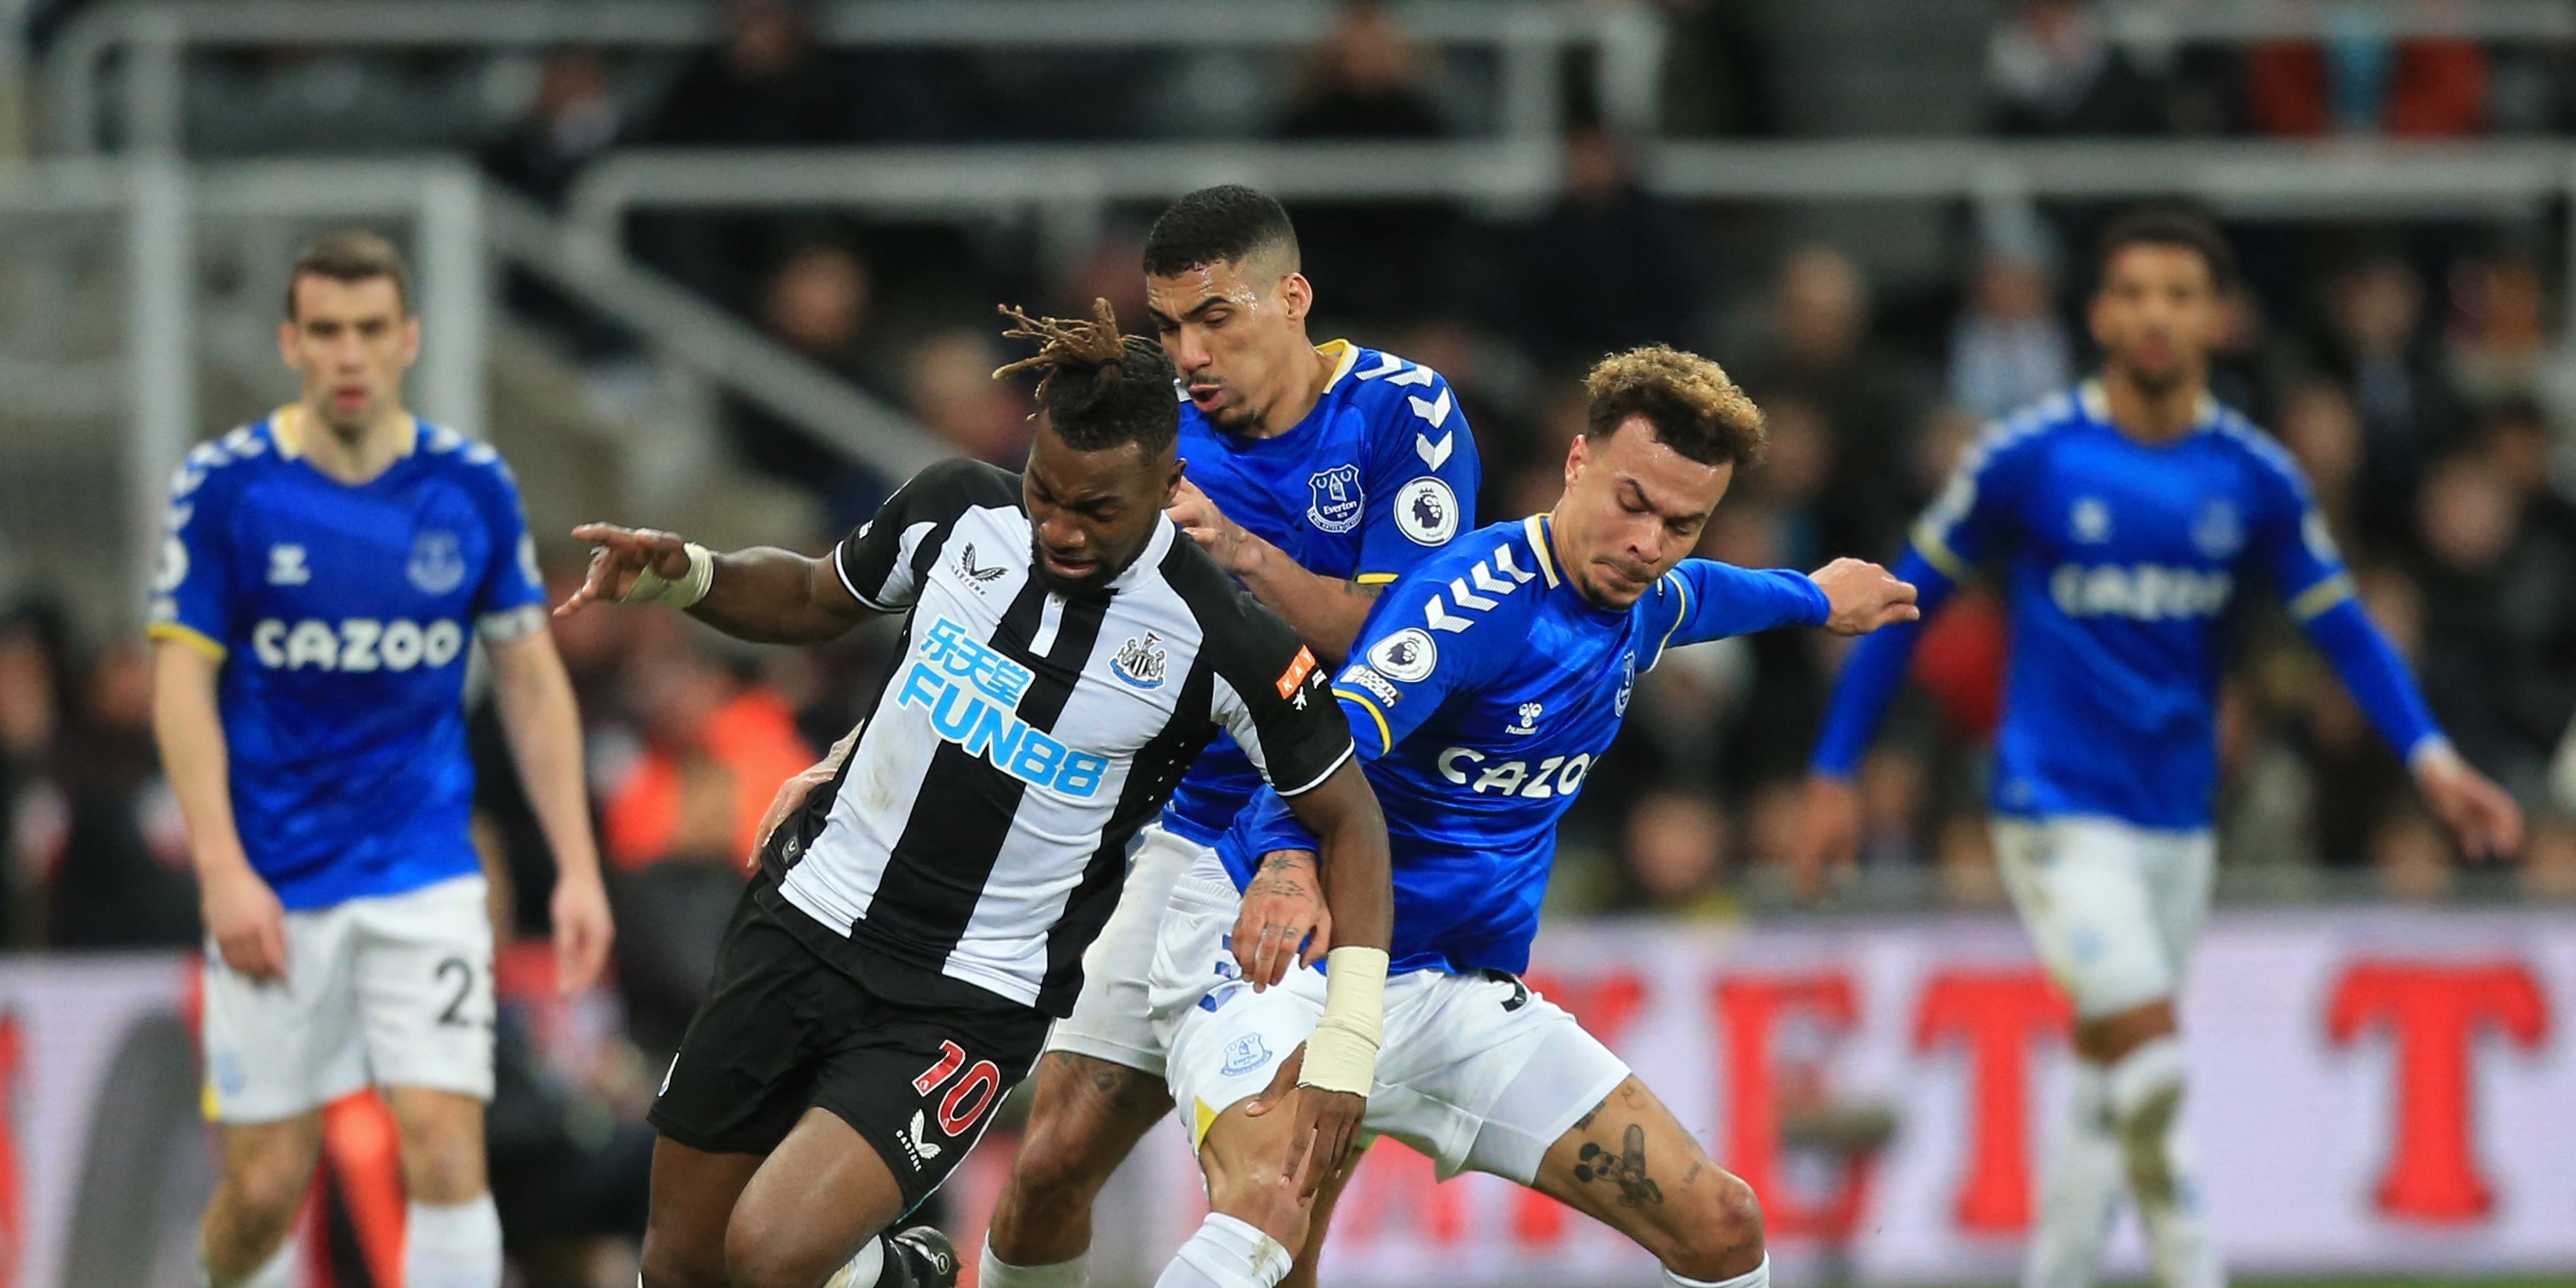 Newcastle’s Saint-Maximin destroys Everton fan on Twitter with ruthless reply to online trolling